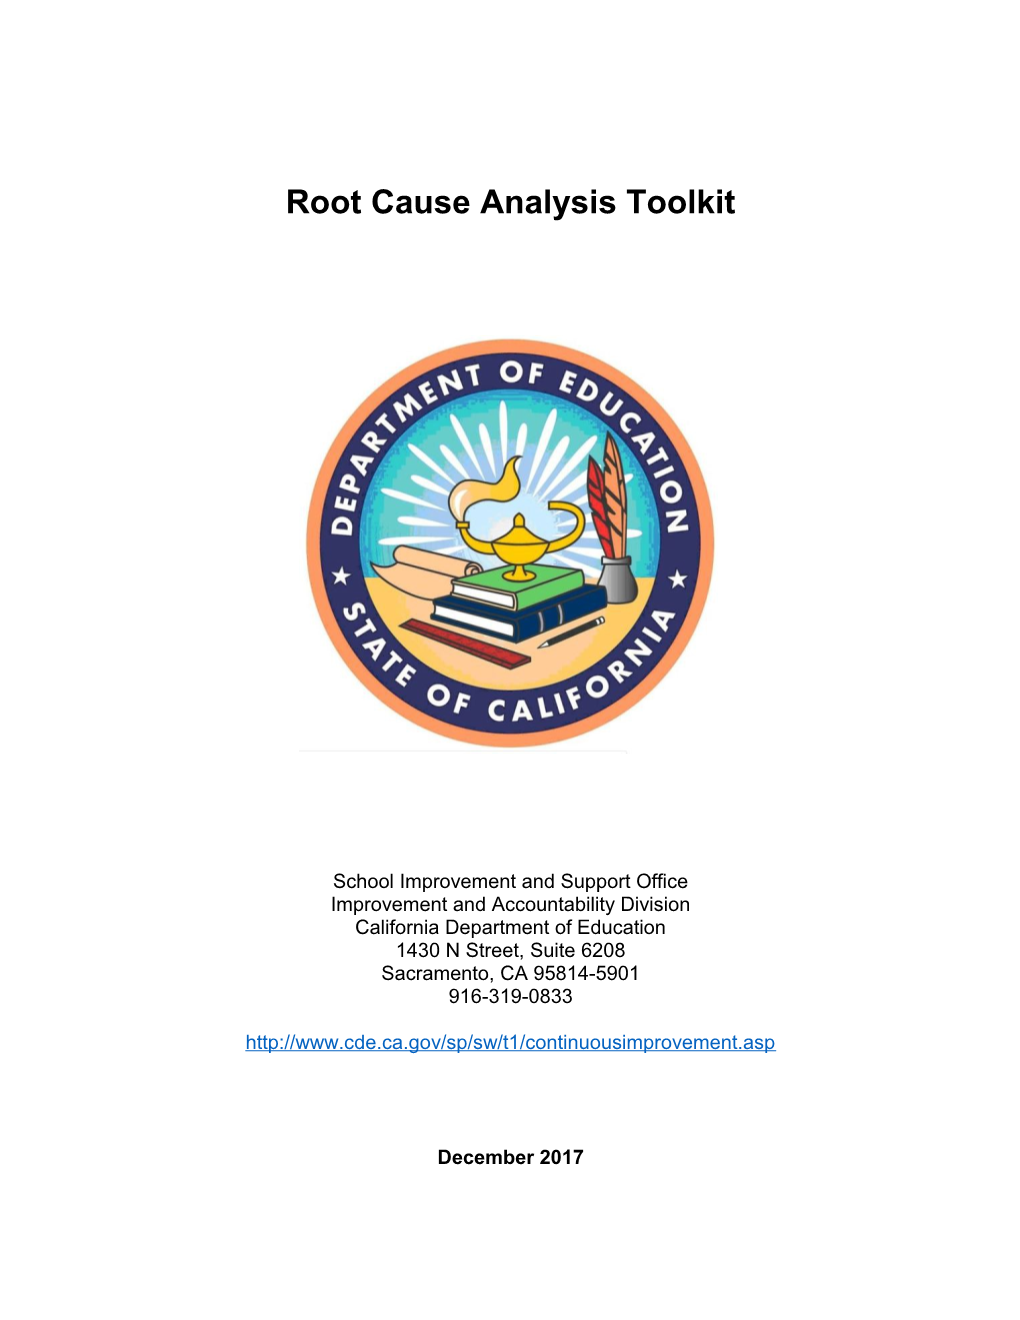 Continuous Improvement Root Cause Toolkit - Title I (CA Dept of Education)